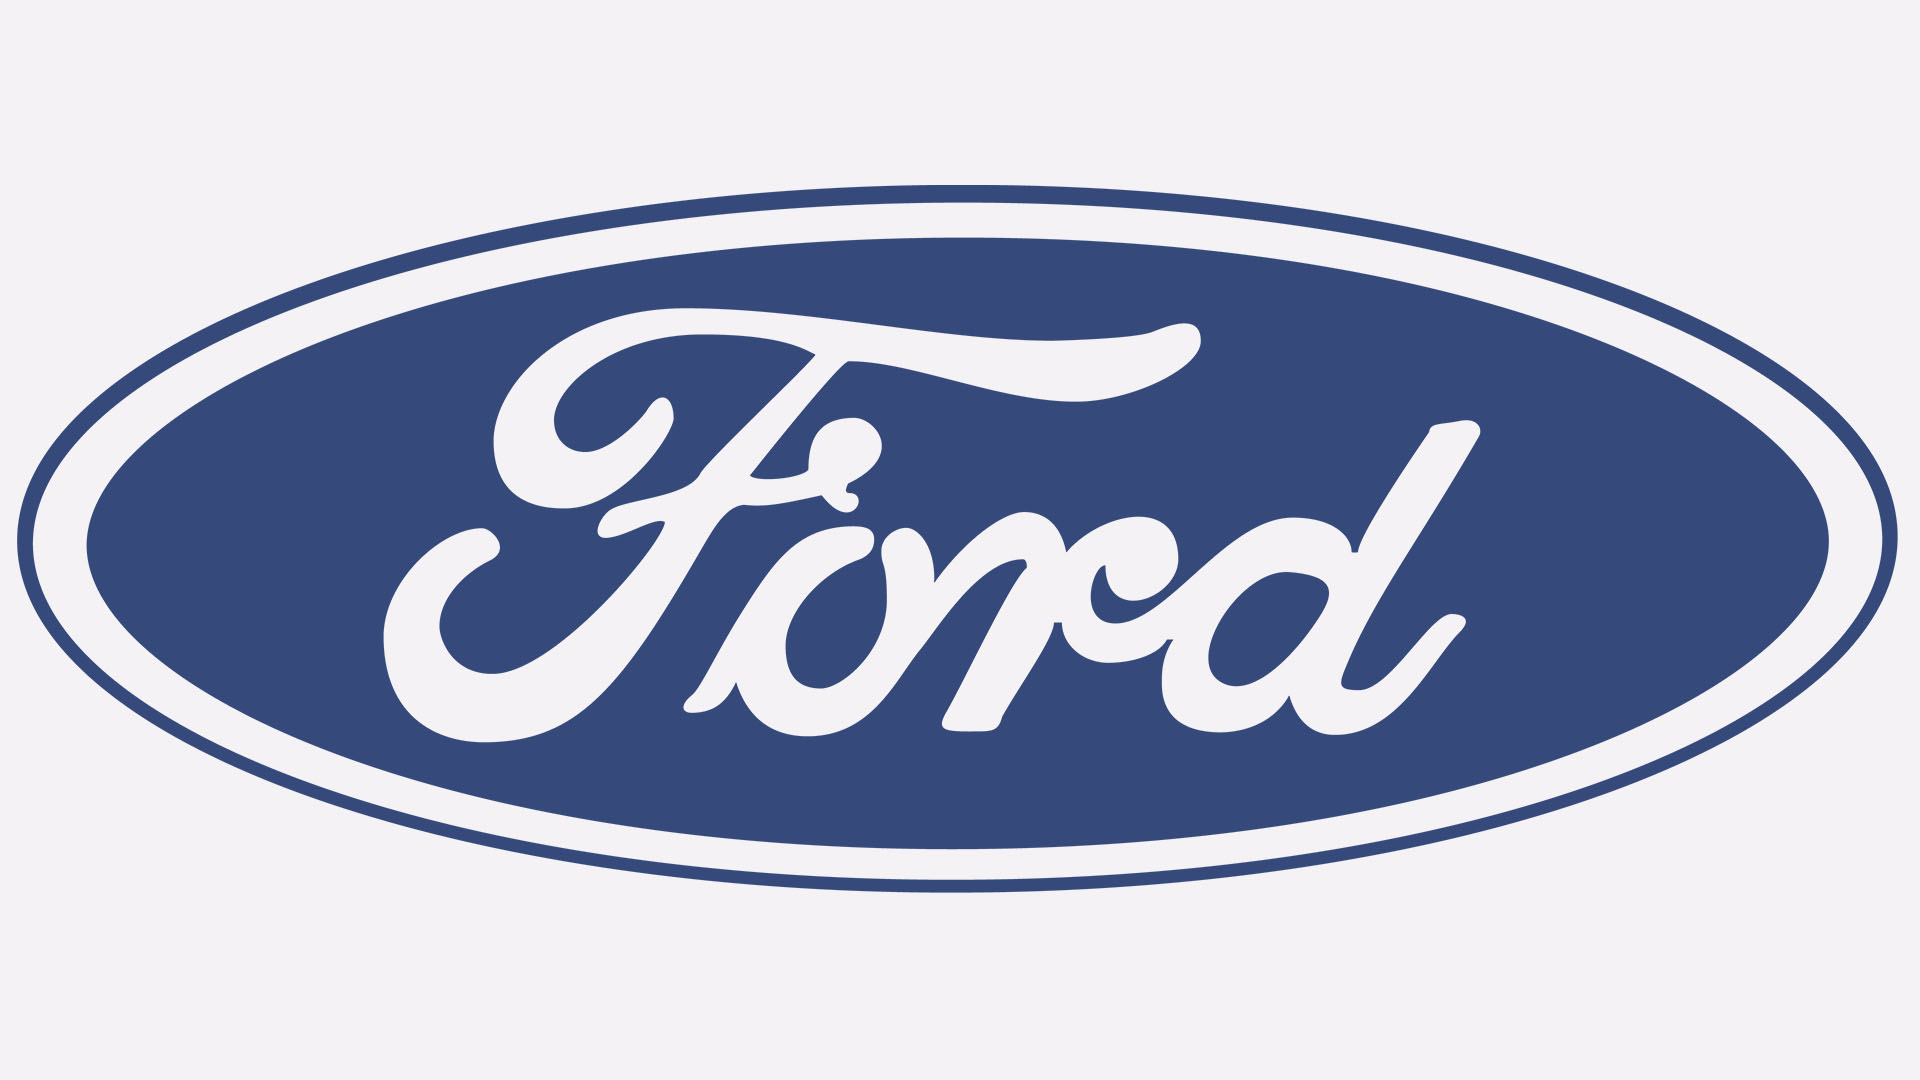 Ford Logo Ford Car Symbol Meaning And History Turbologo Images